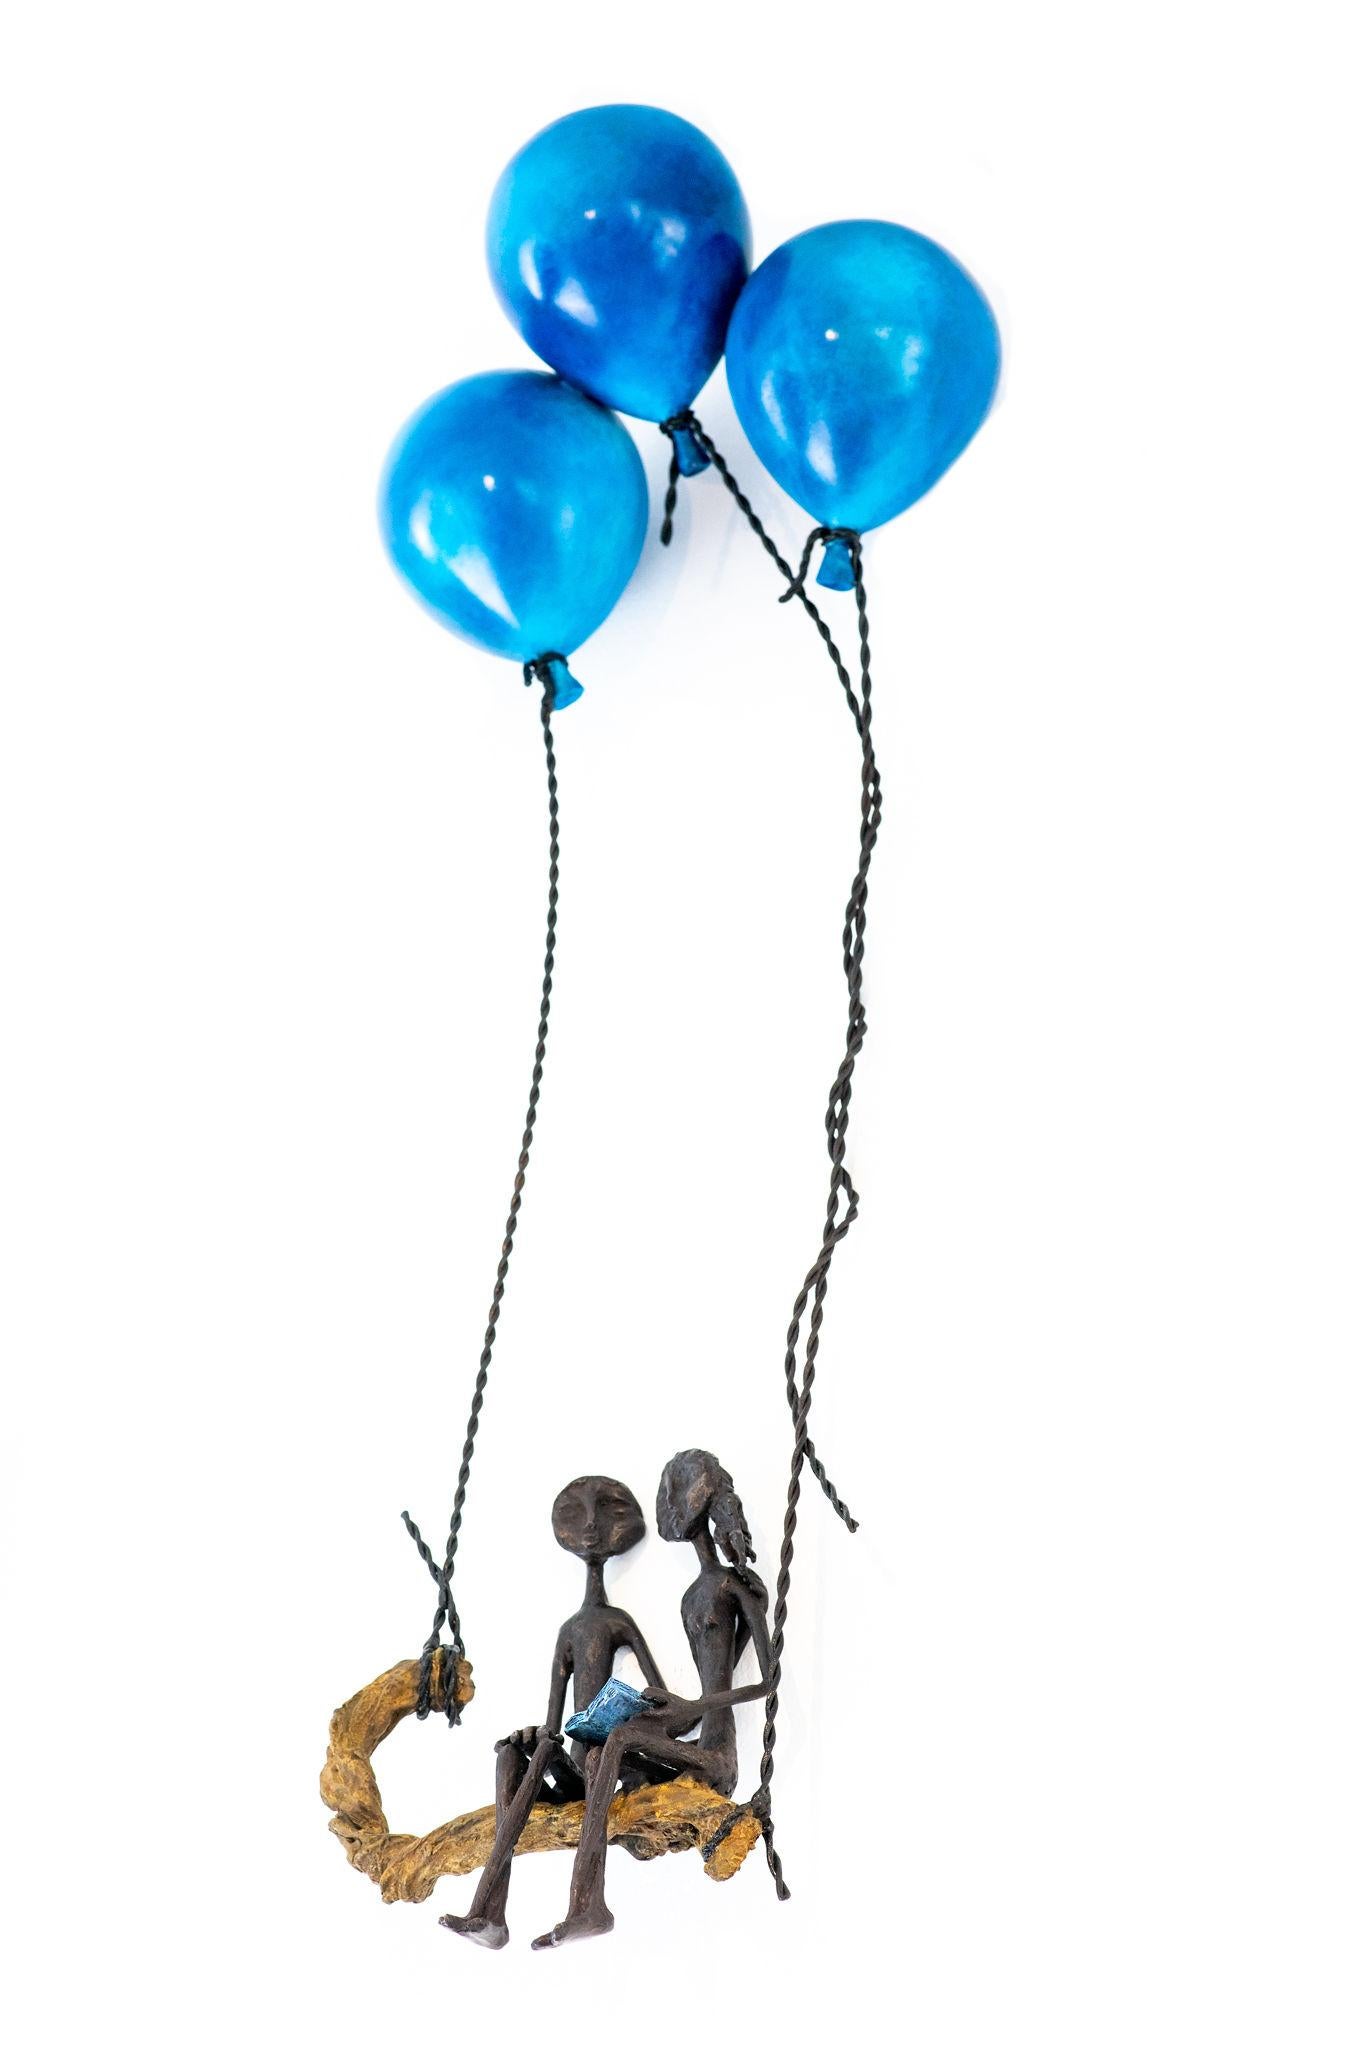 Ruth Bloch, Blossoming with 3 balloons, lovers or angels,Bronze sculpture 